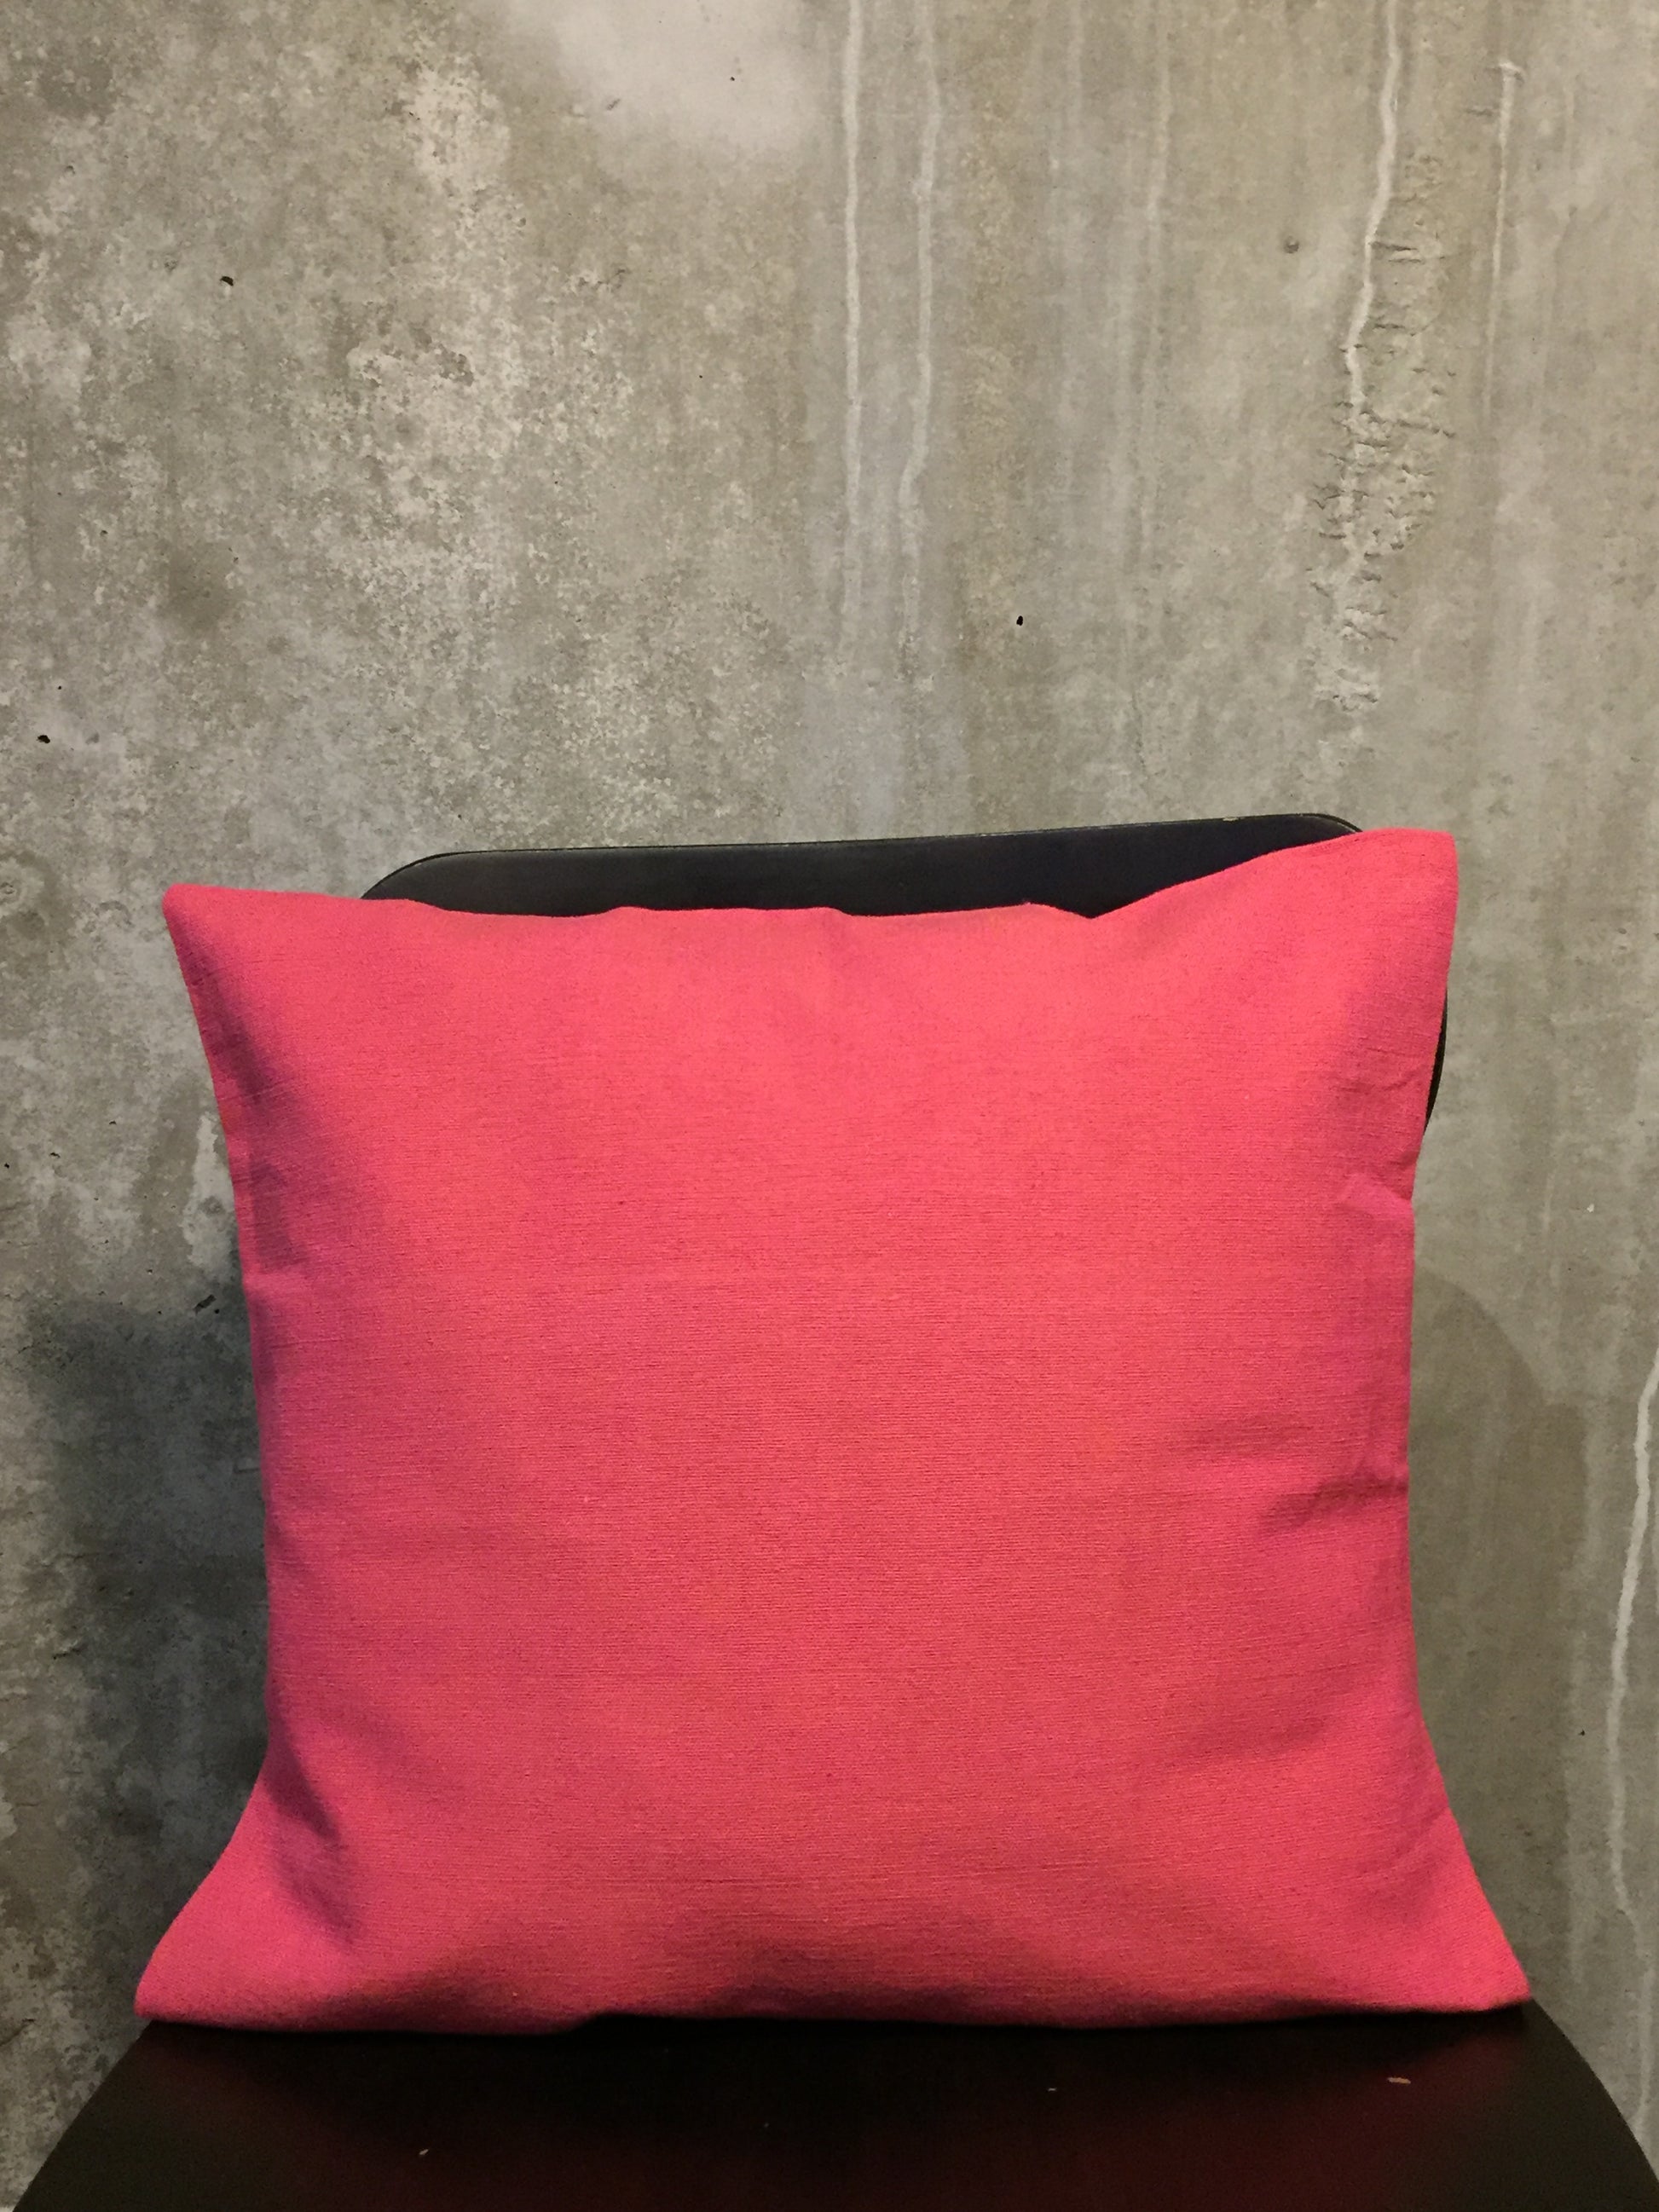 Handwoven Egyptian Cotton Cushion Cover - Solid Color - Dandarah